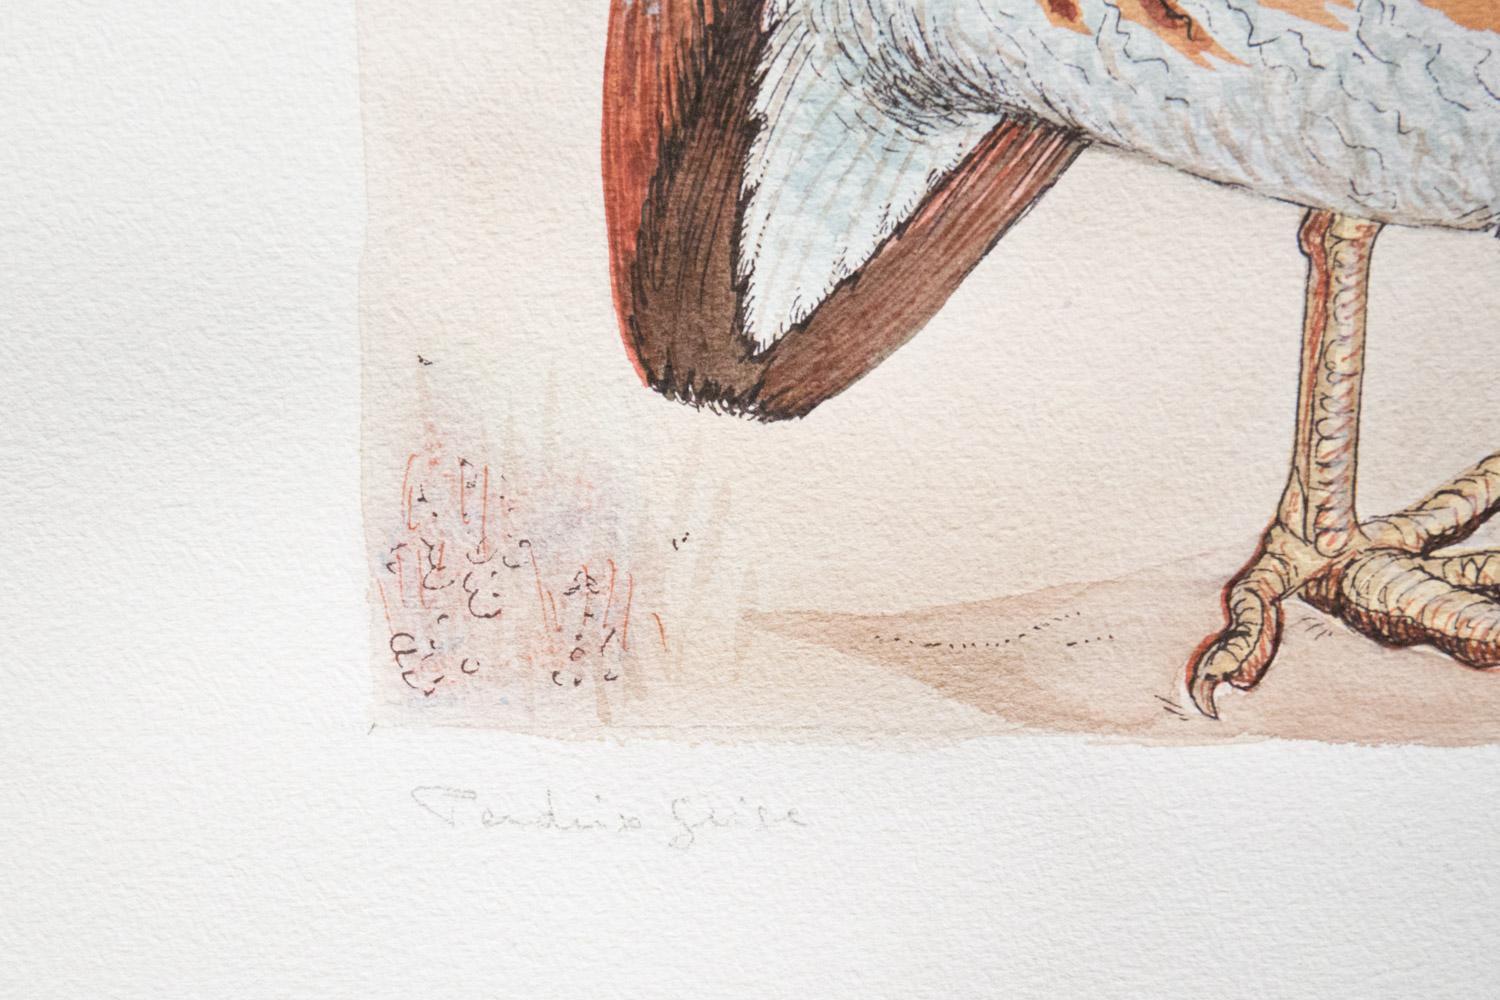 Pair of elegant watercolours
Original Animalier Subject 
20th Century 
Both Signed
Every item of our Gallery, upon request, is accompanied by a certificate of authenticity issued by Sabrina Egidi official Expert in Italian furniture for the Chamber